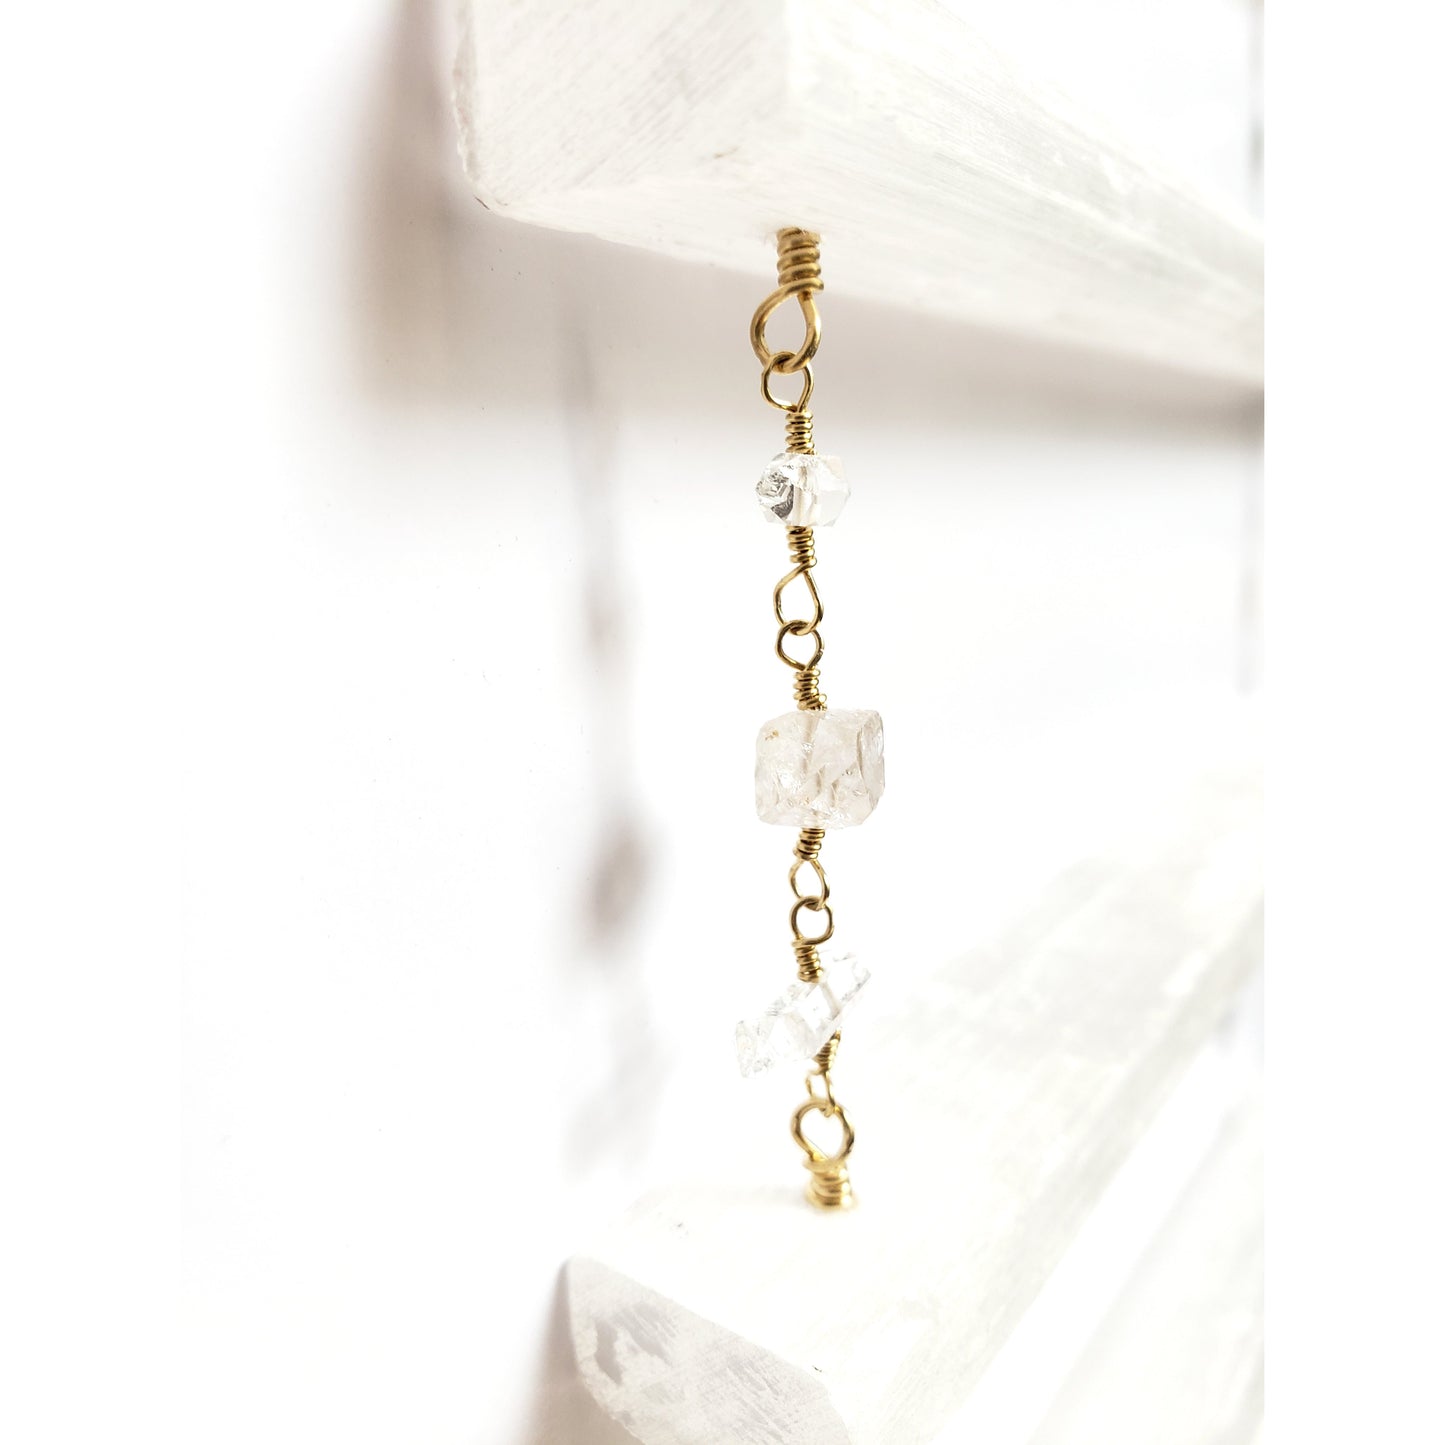 Selenite Ladder Crystal Wall Décor by Ariana Ost